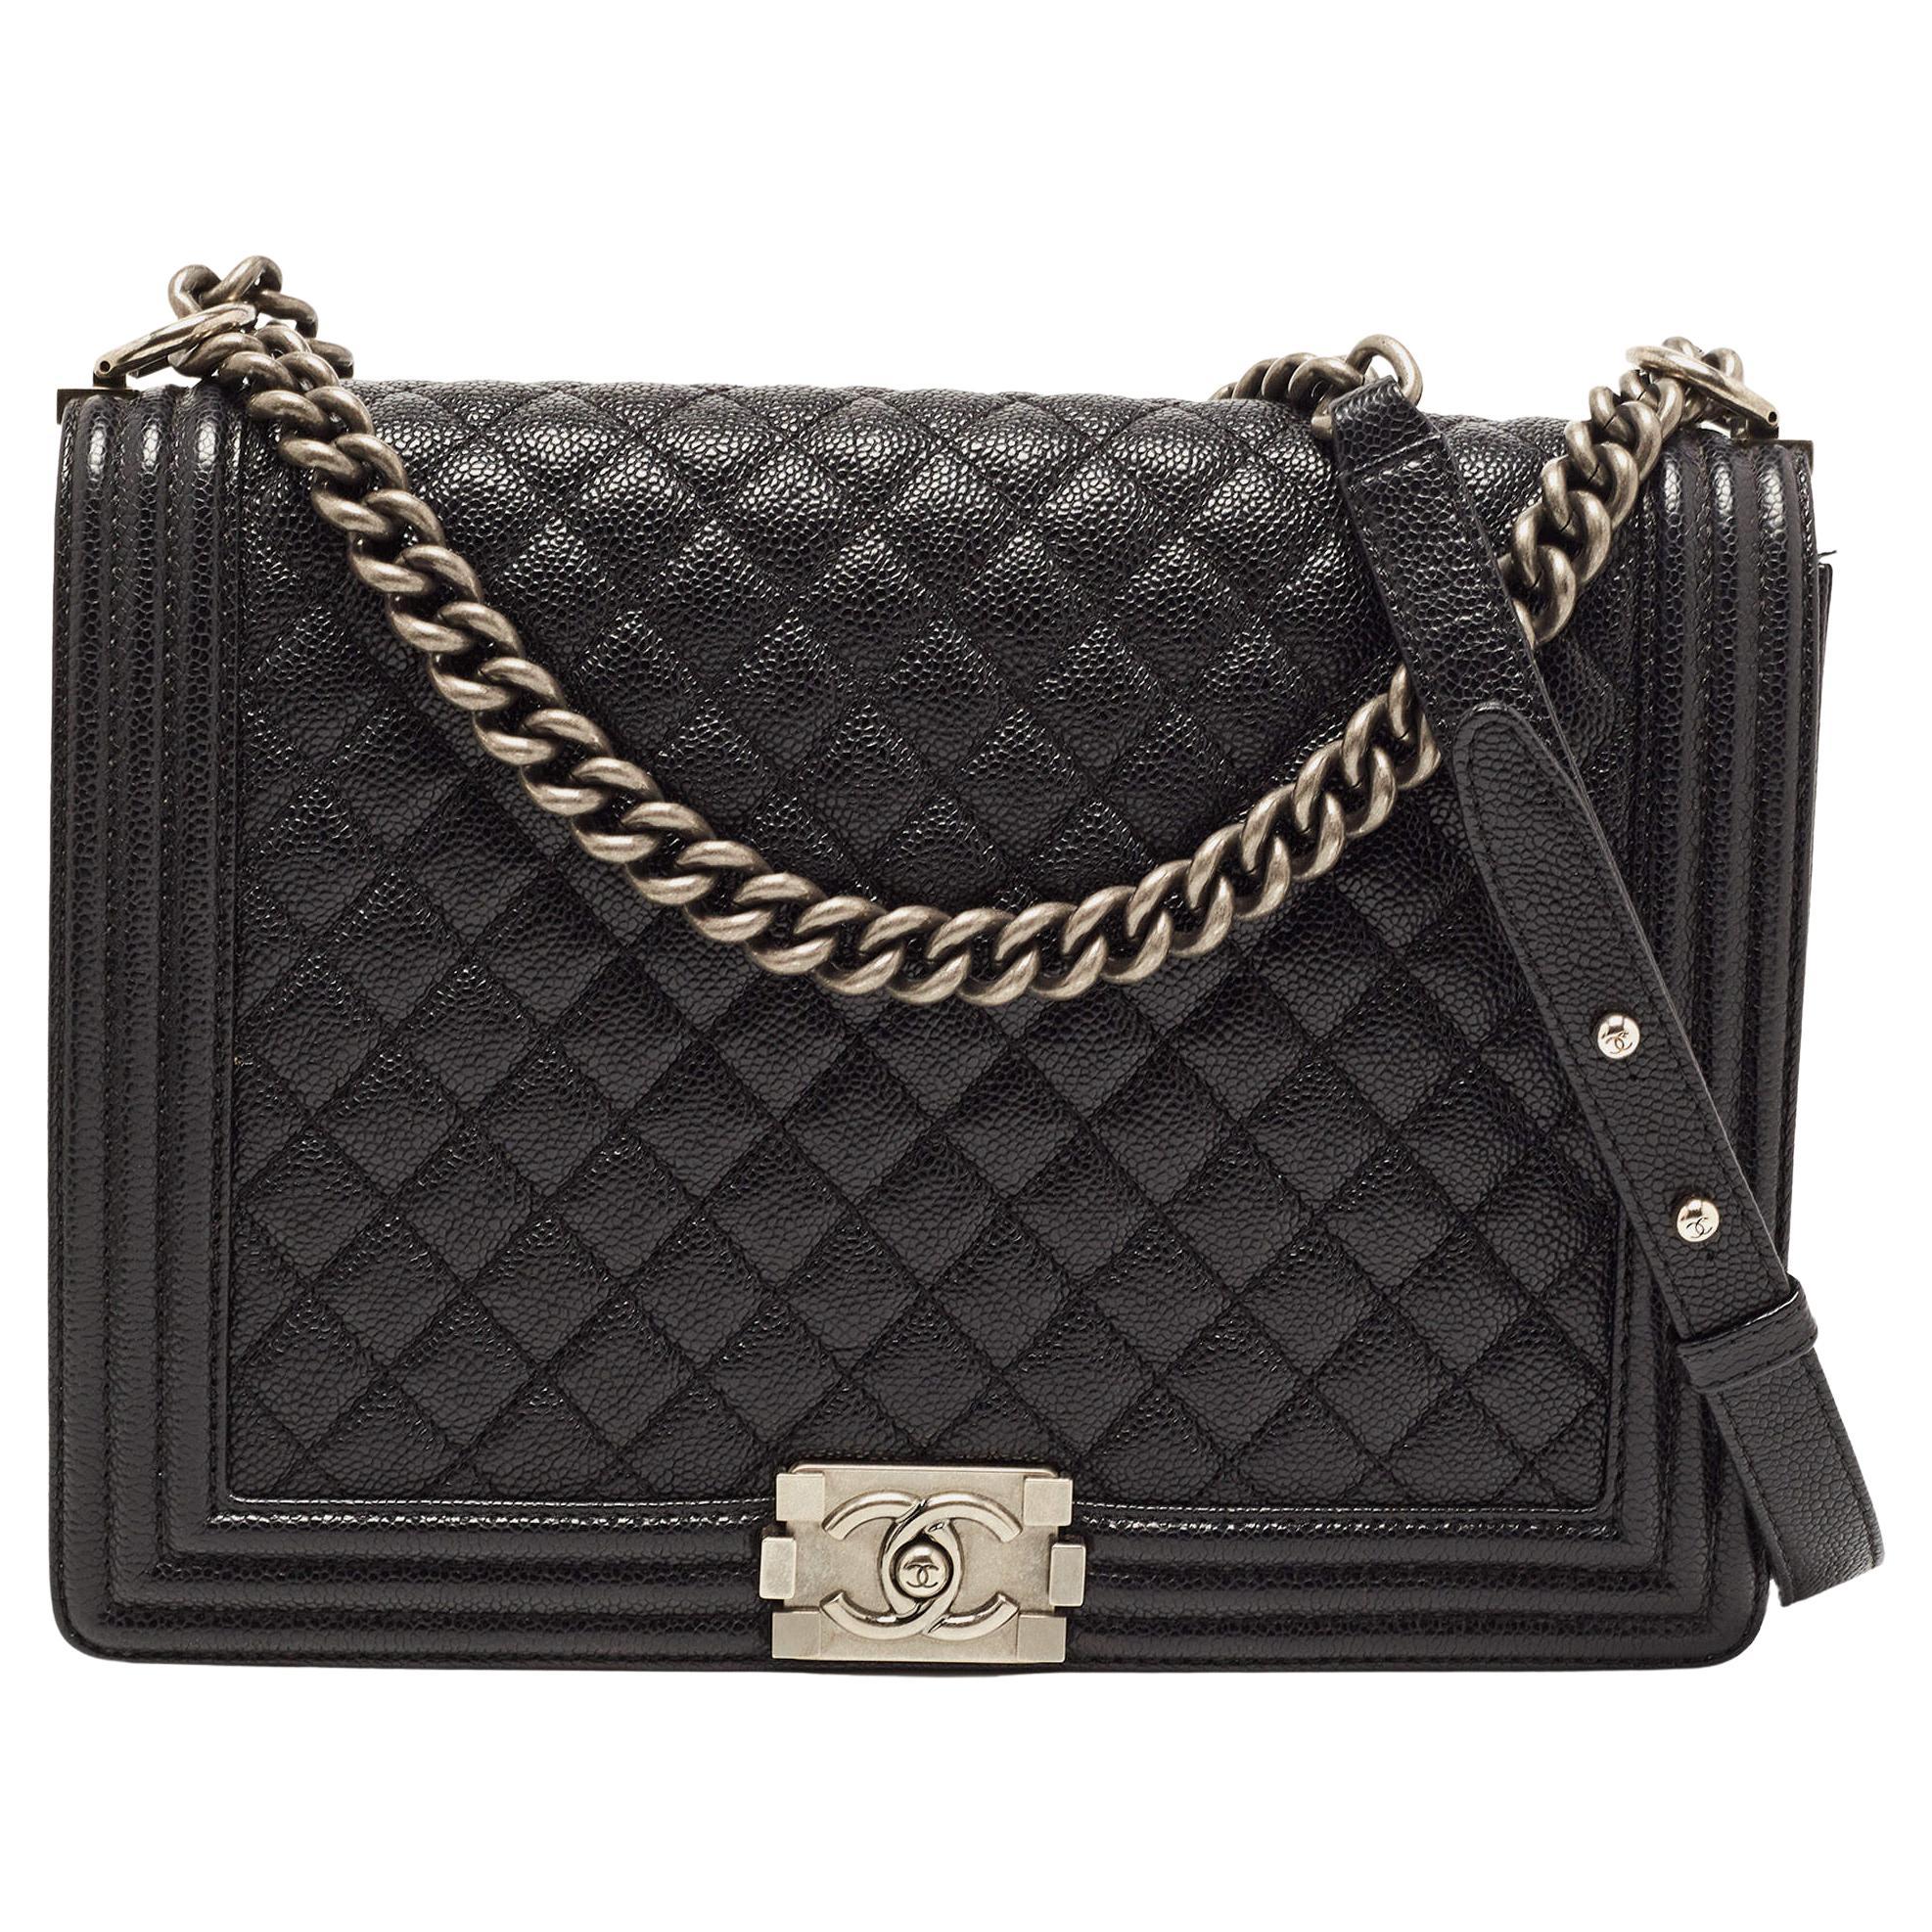 Chanel Black Quilted Caviar Leather Large Boy Flap Bag